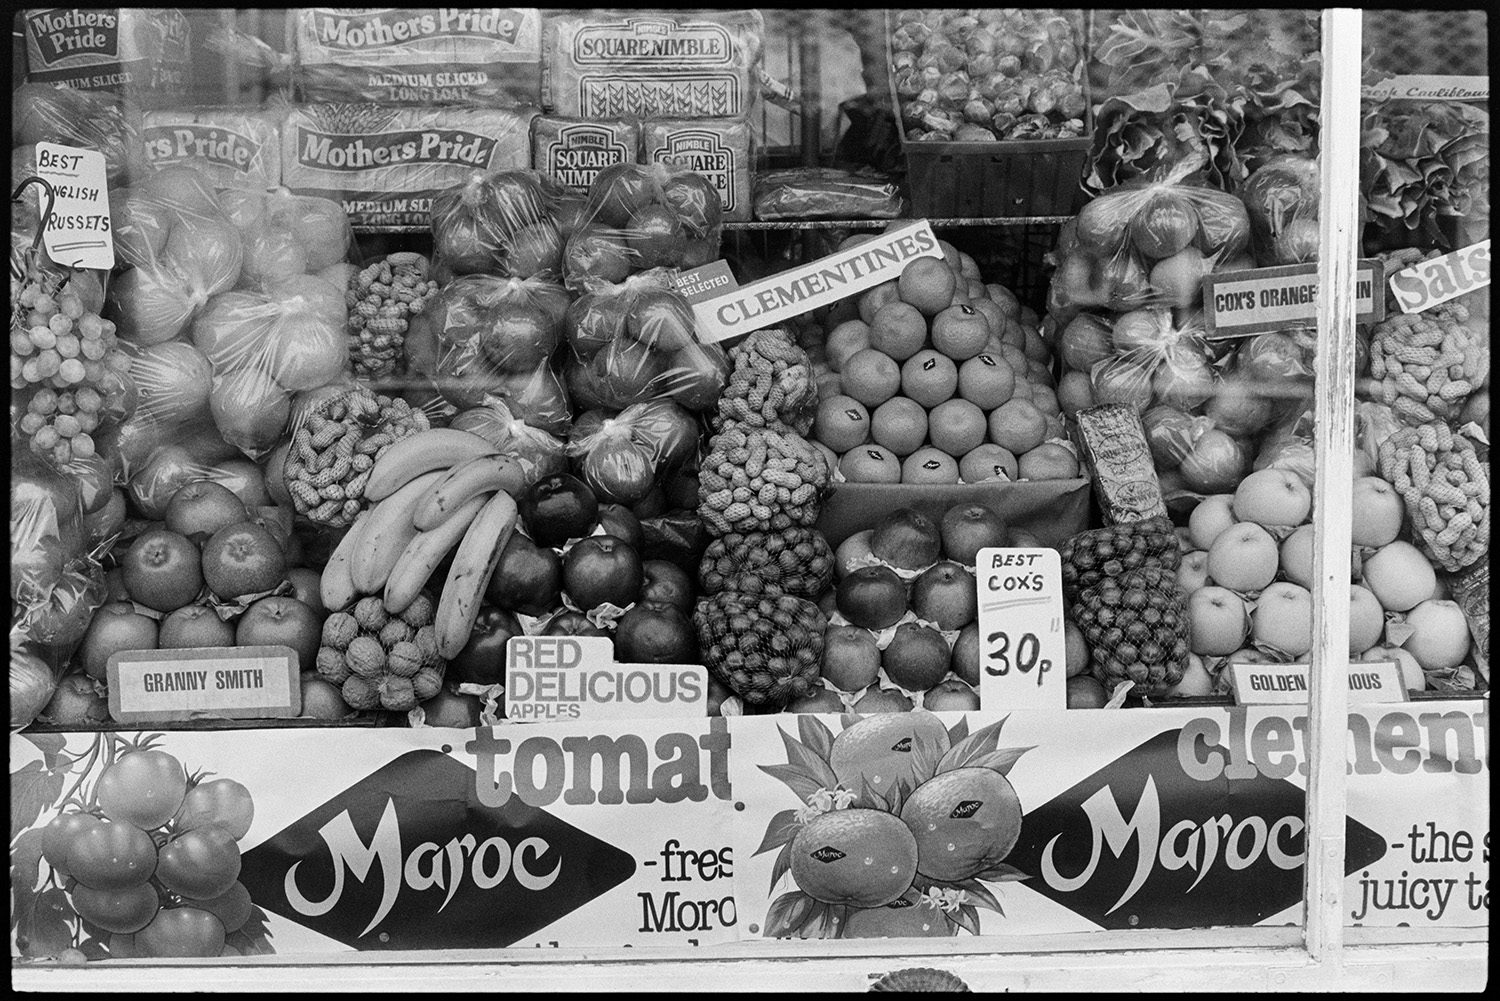 Fruit and nuts displayed in shop window.
[Fruit, including apples, oranges and bananas, alongside packaged bread and bags of various nuts are displayed in a shop window in Barnstaple. A sign for Maroc fresh produce is in the front of the window.]